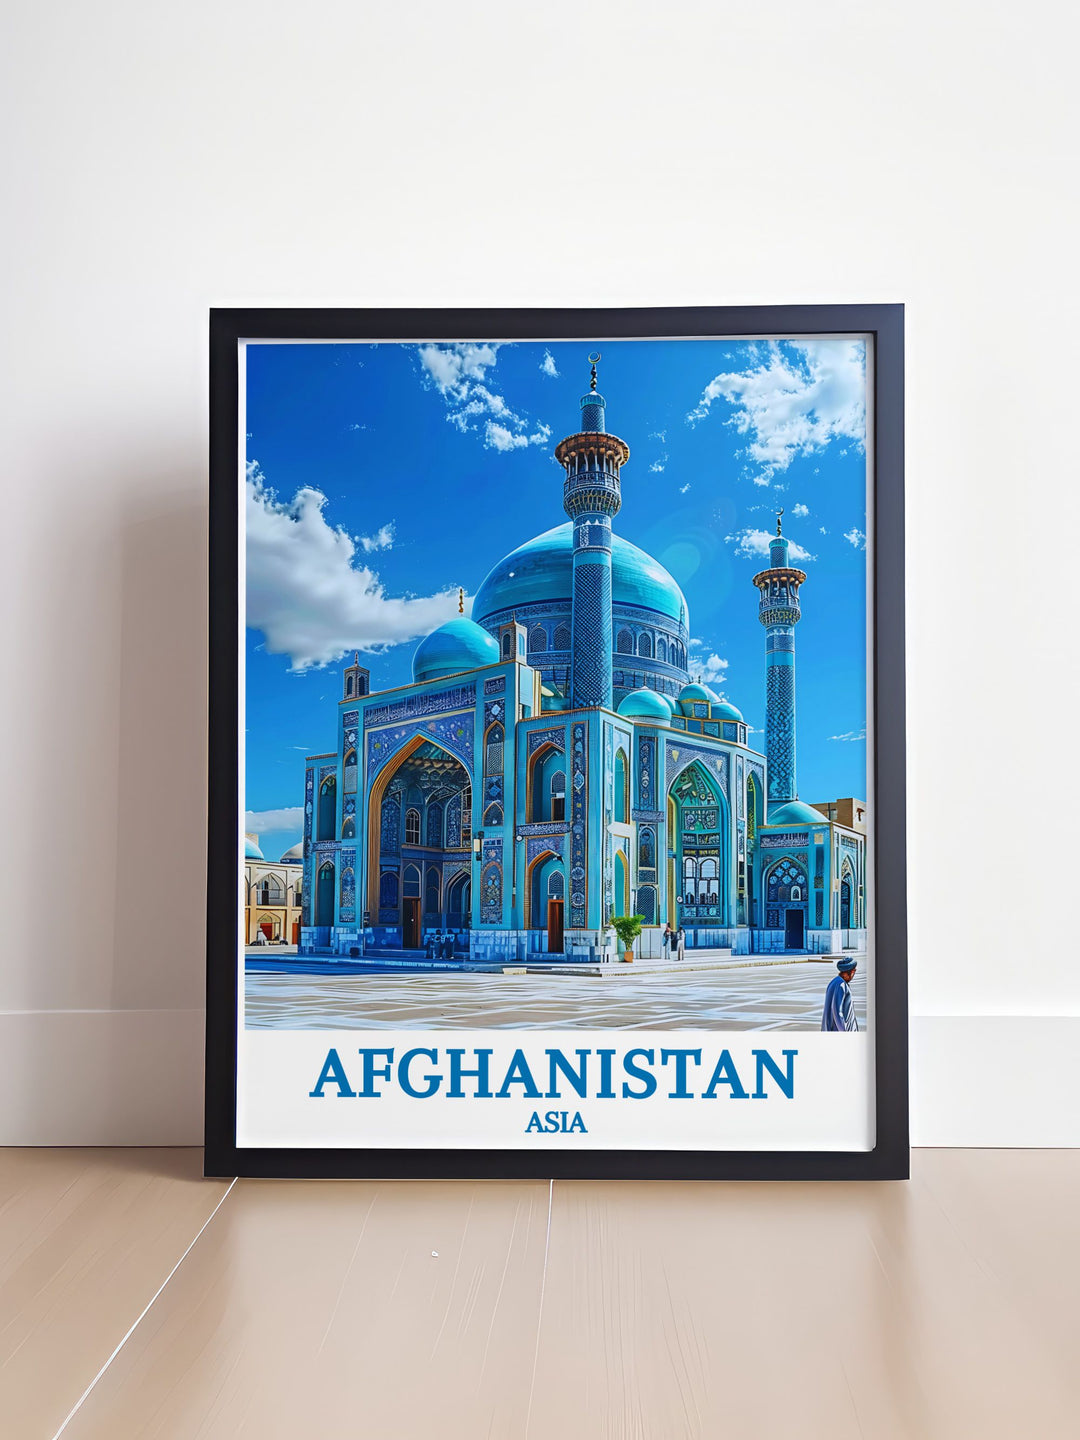 A stunning Afghanistan Poster featuring The Blue Mosque Mazar e Sharif captured in fine line print offering a colorful and detailed representation perfect for art enthusiasts and collectors